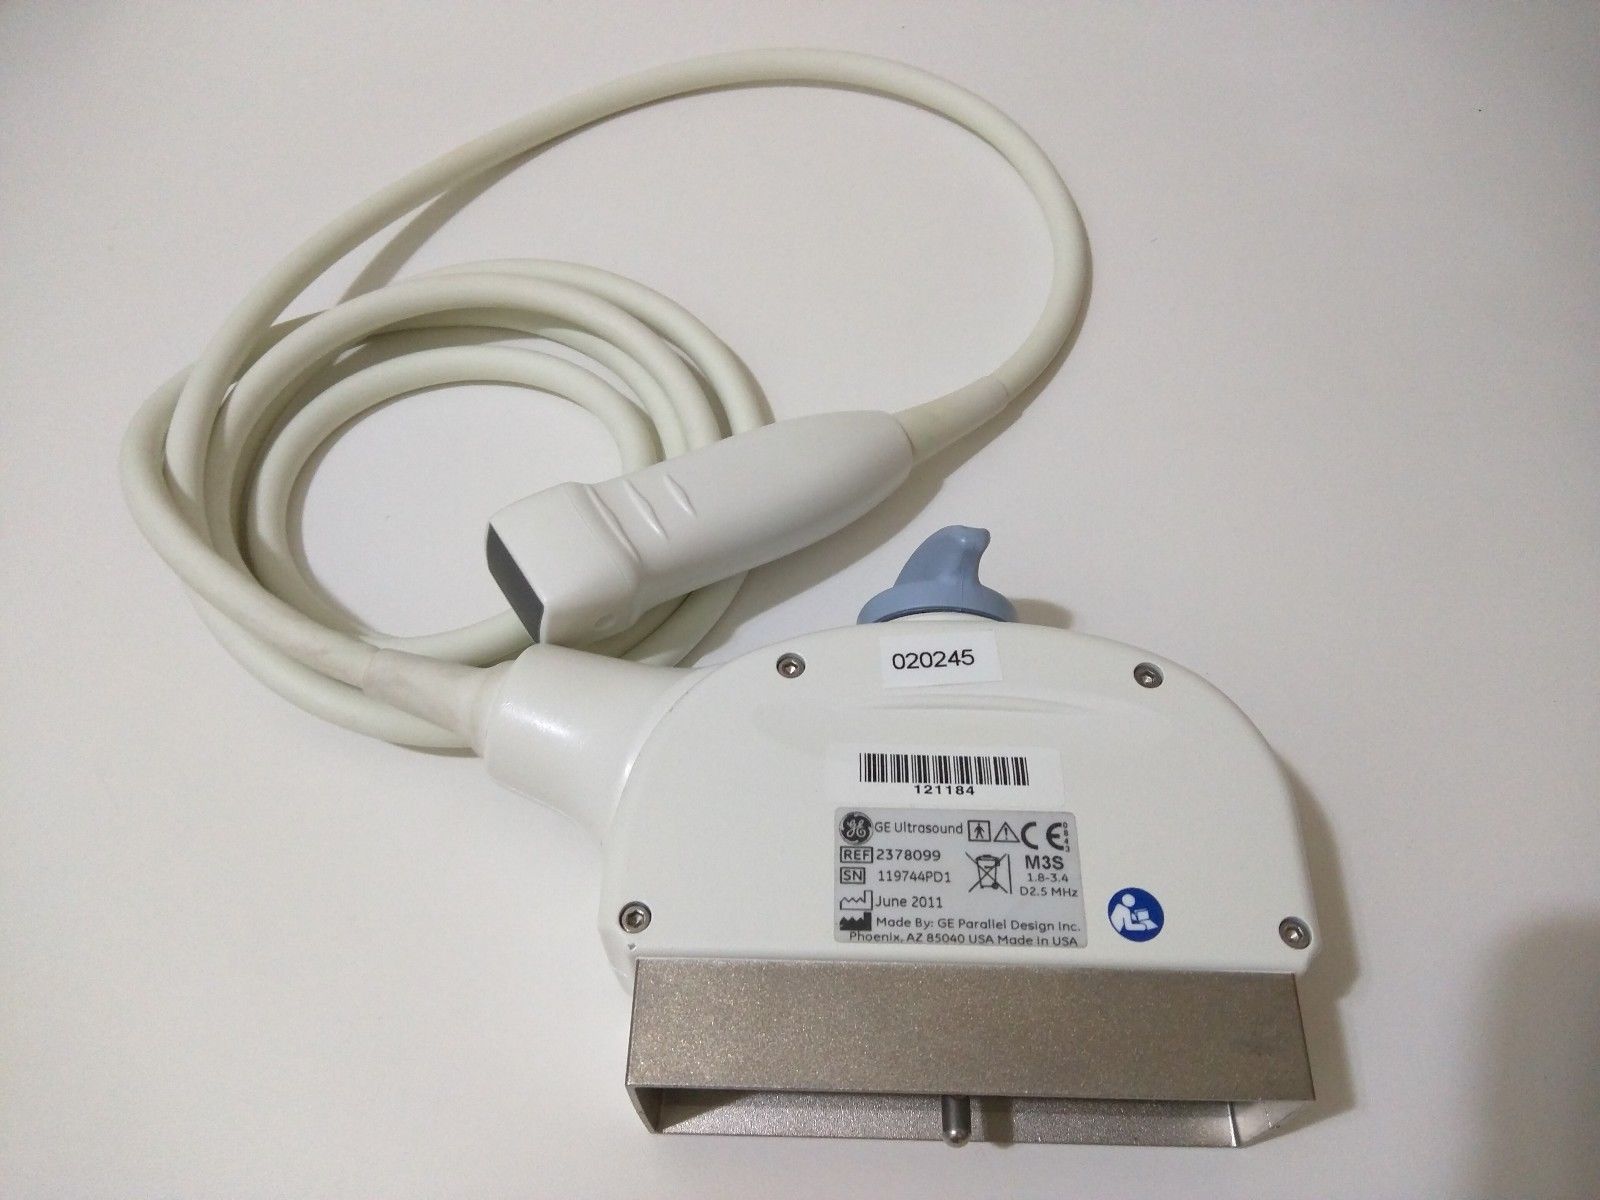 GE M3S PHASED ARRAY TRANSDUCER PROBE DOM 2011 DIAGNOSTIC ULTRASOUND MACHINES FOR SALE